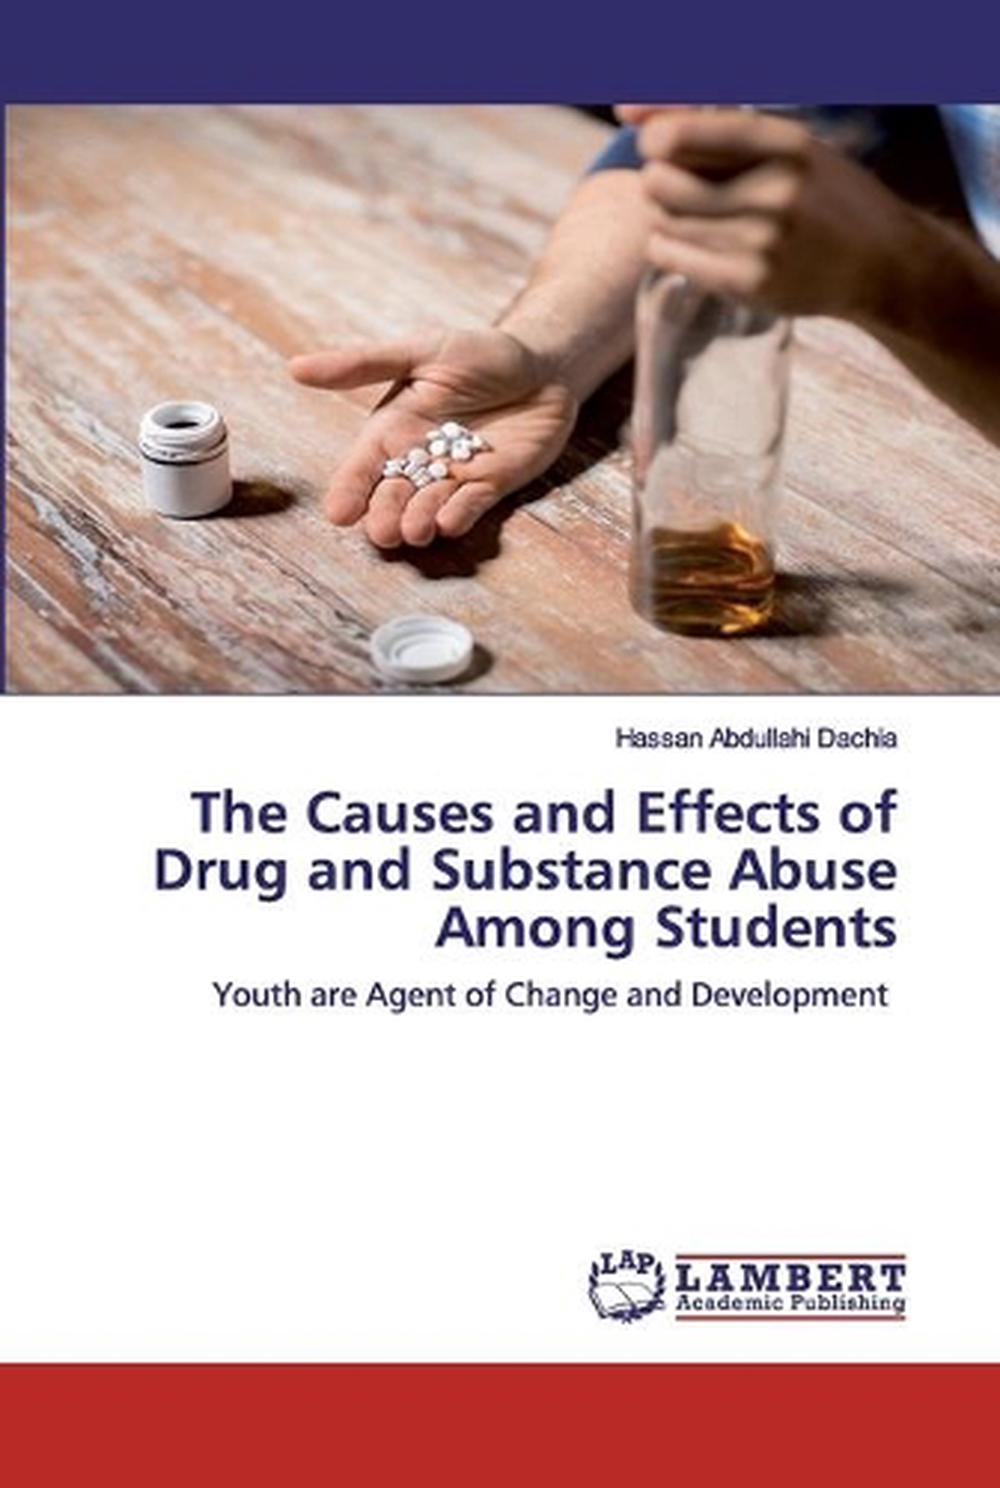 research proposal on effects of drug abuse